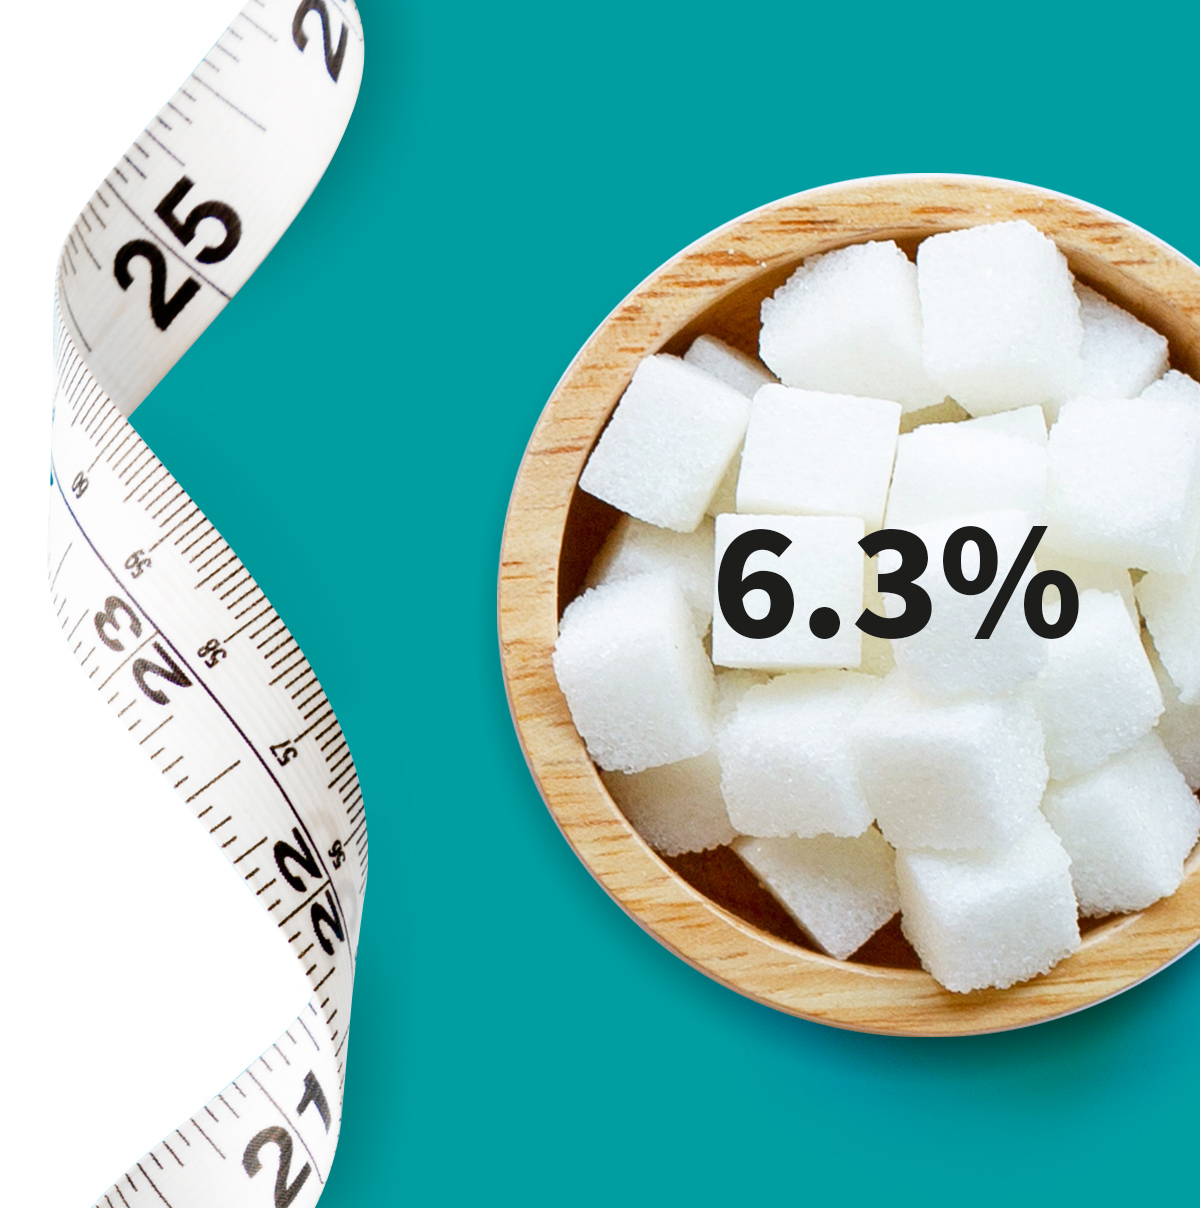 [MEA.COM-en MEA (english)] •	A measuring tape and a bowl full of sugar cubes shown as a metaphor for diabetes